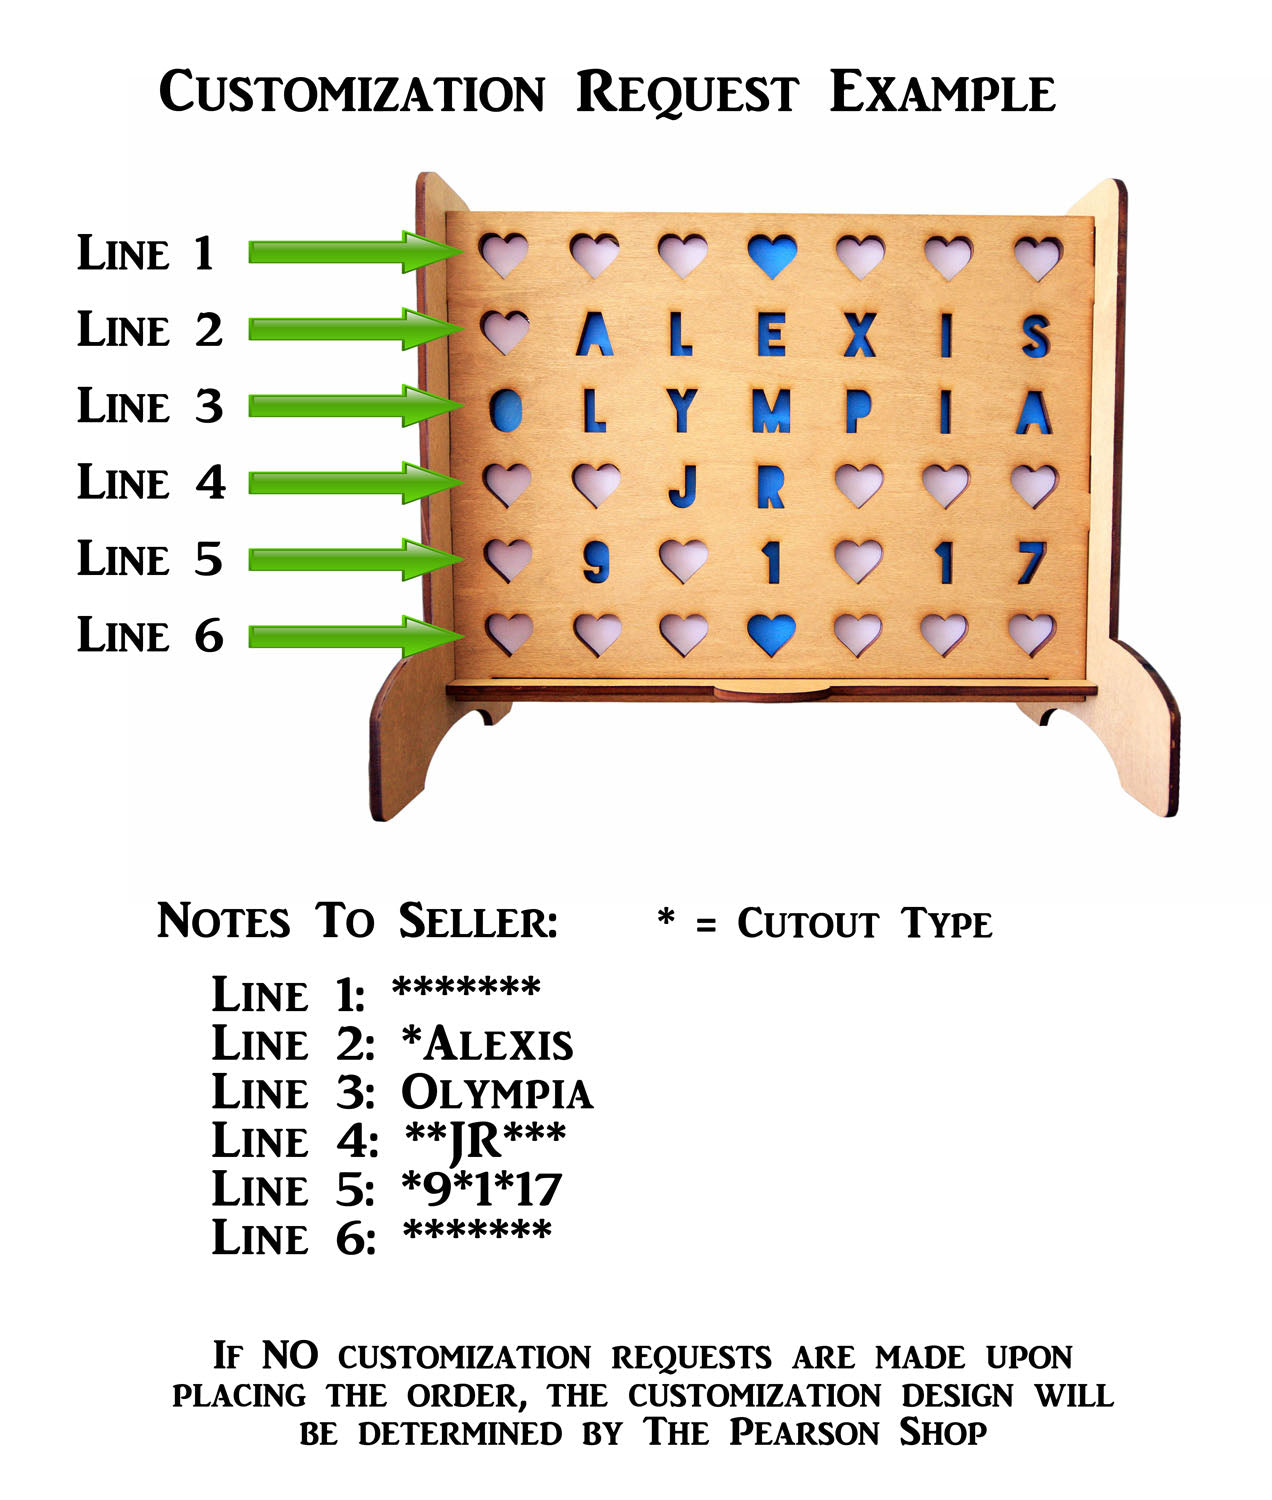 Connect 4 Custom Cutouts Game